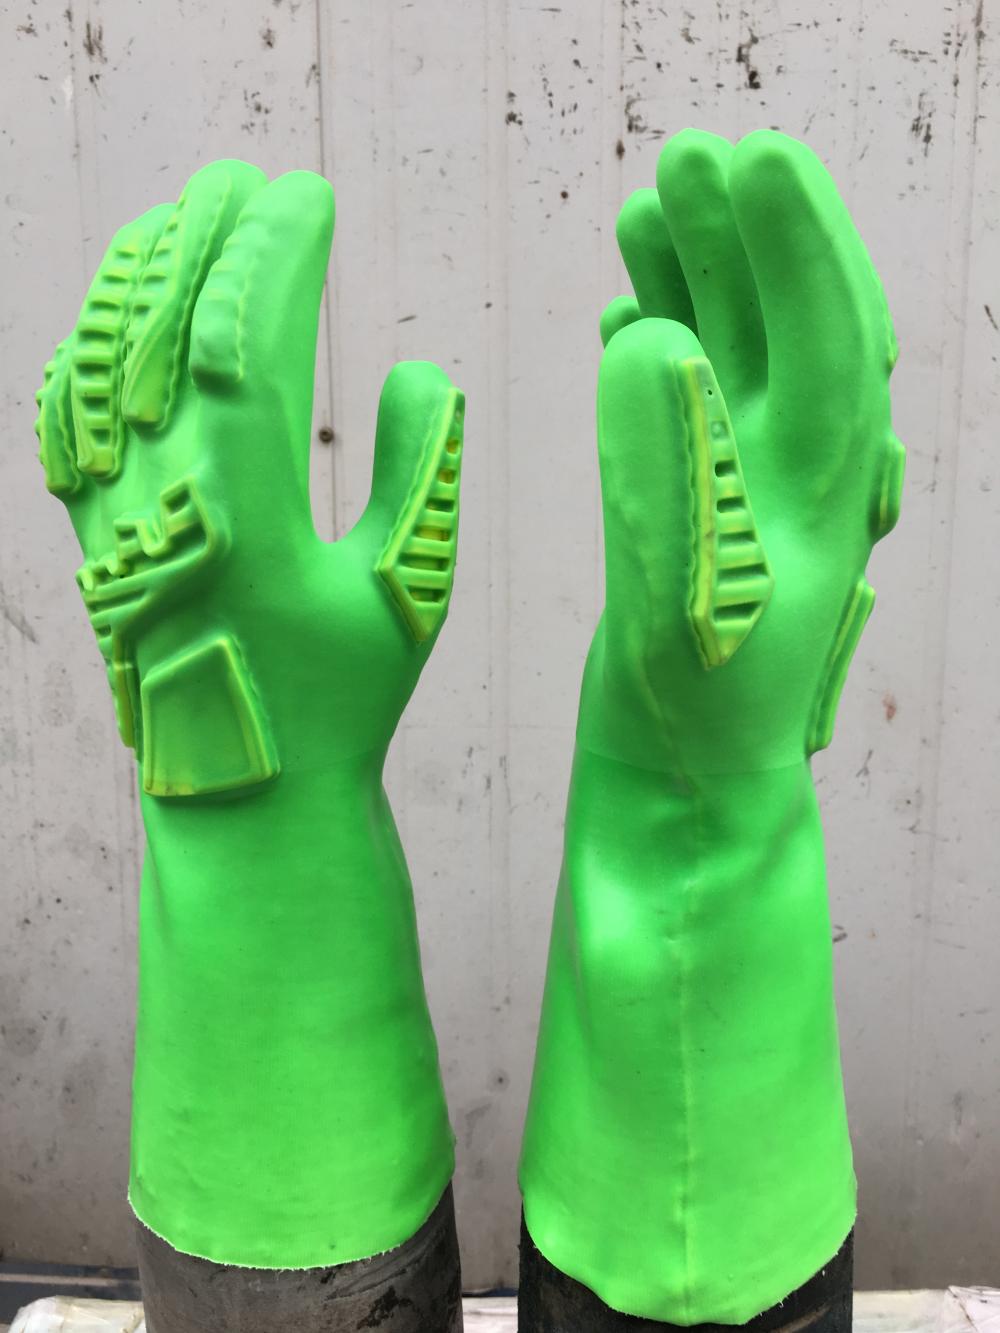 Green TPR impact gloves with TPR on hand back